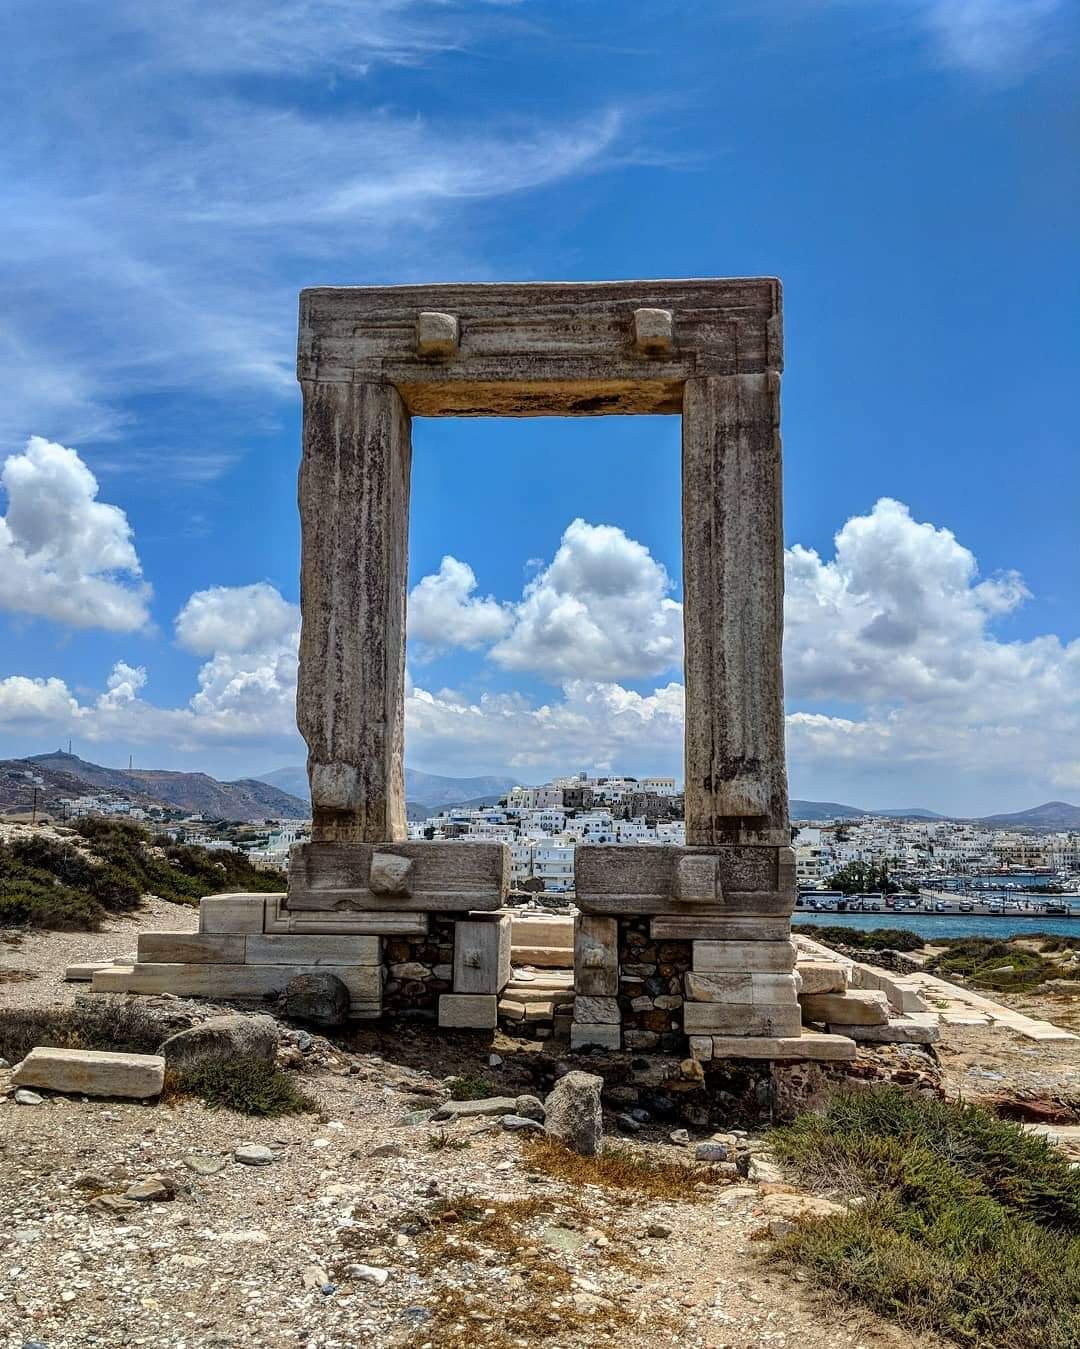 From the beautiful Greek island of Naxos
- 
ST5 Trainee🩺 in Endocrinology, Diabetes and General Medicine 
🇪🇺 Brejoiner, LibDem 🔶️, fan of science and logic